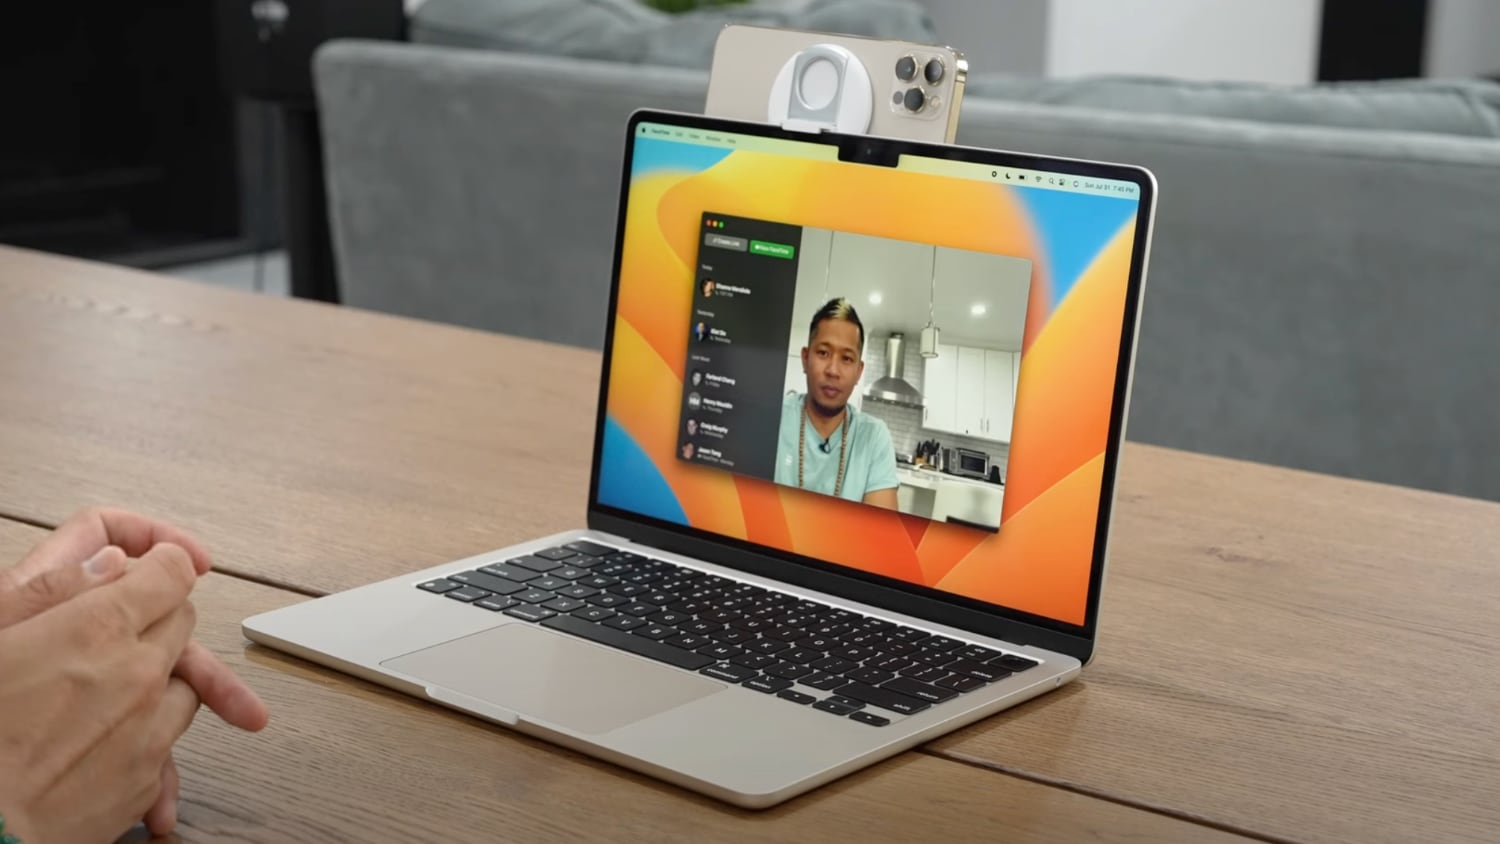 YouTubers Test Out macOS Ventura’s Continuity Camera With Belkin Mount